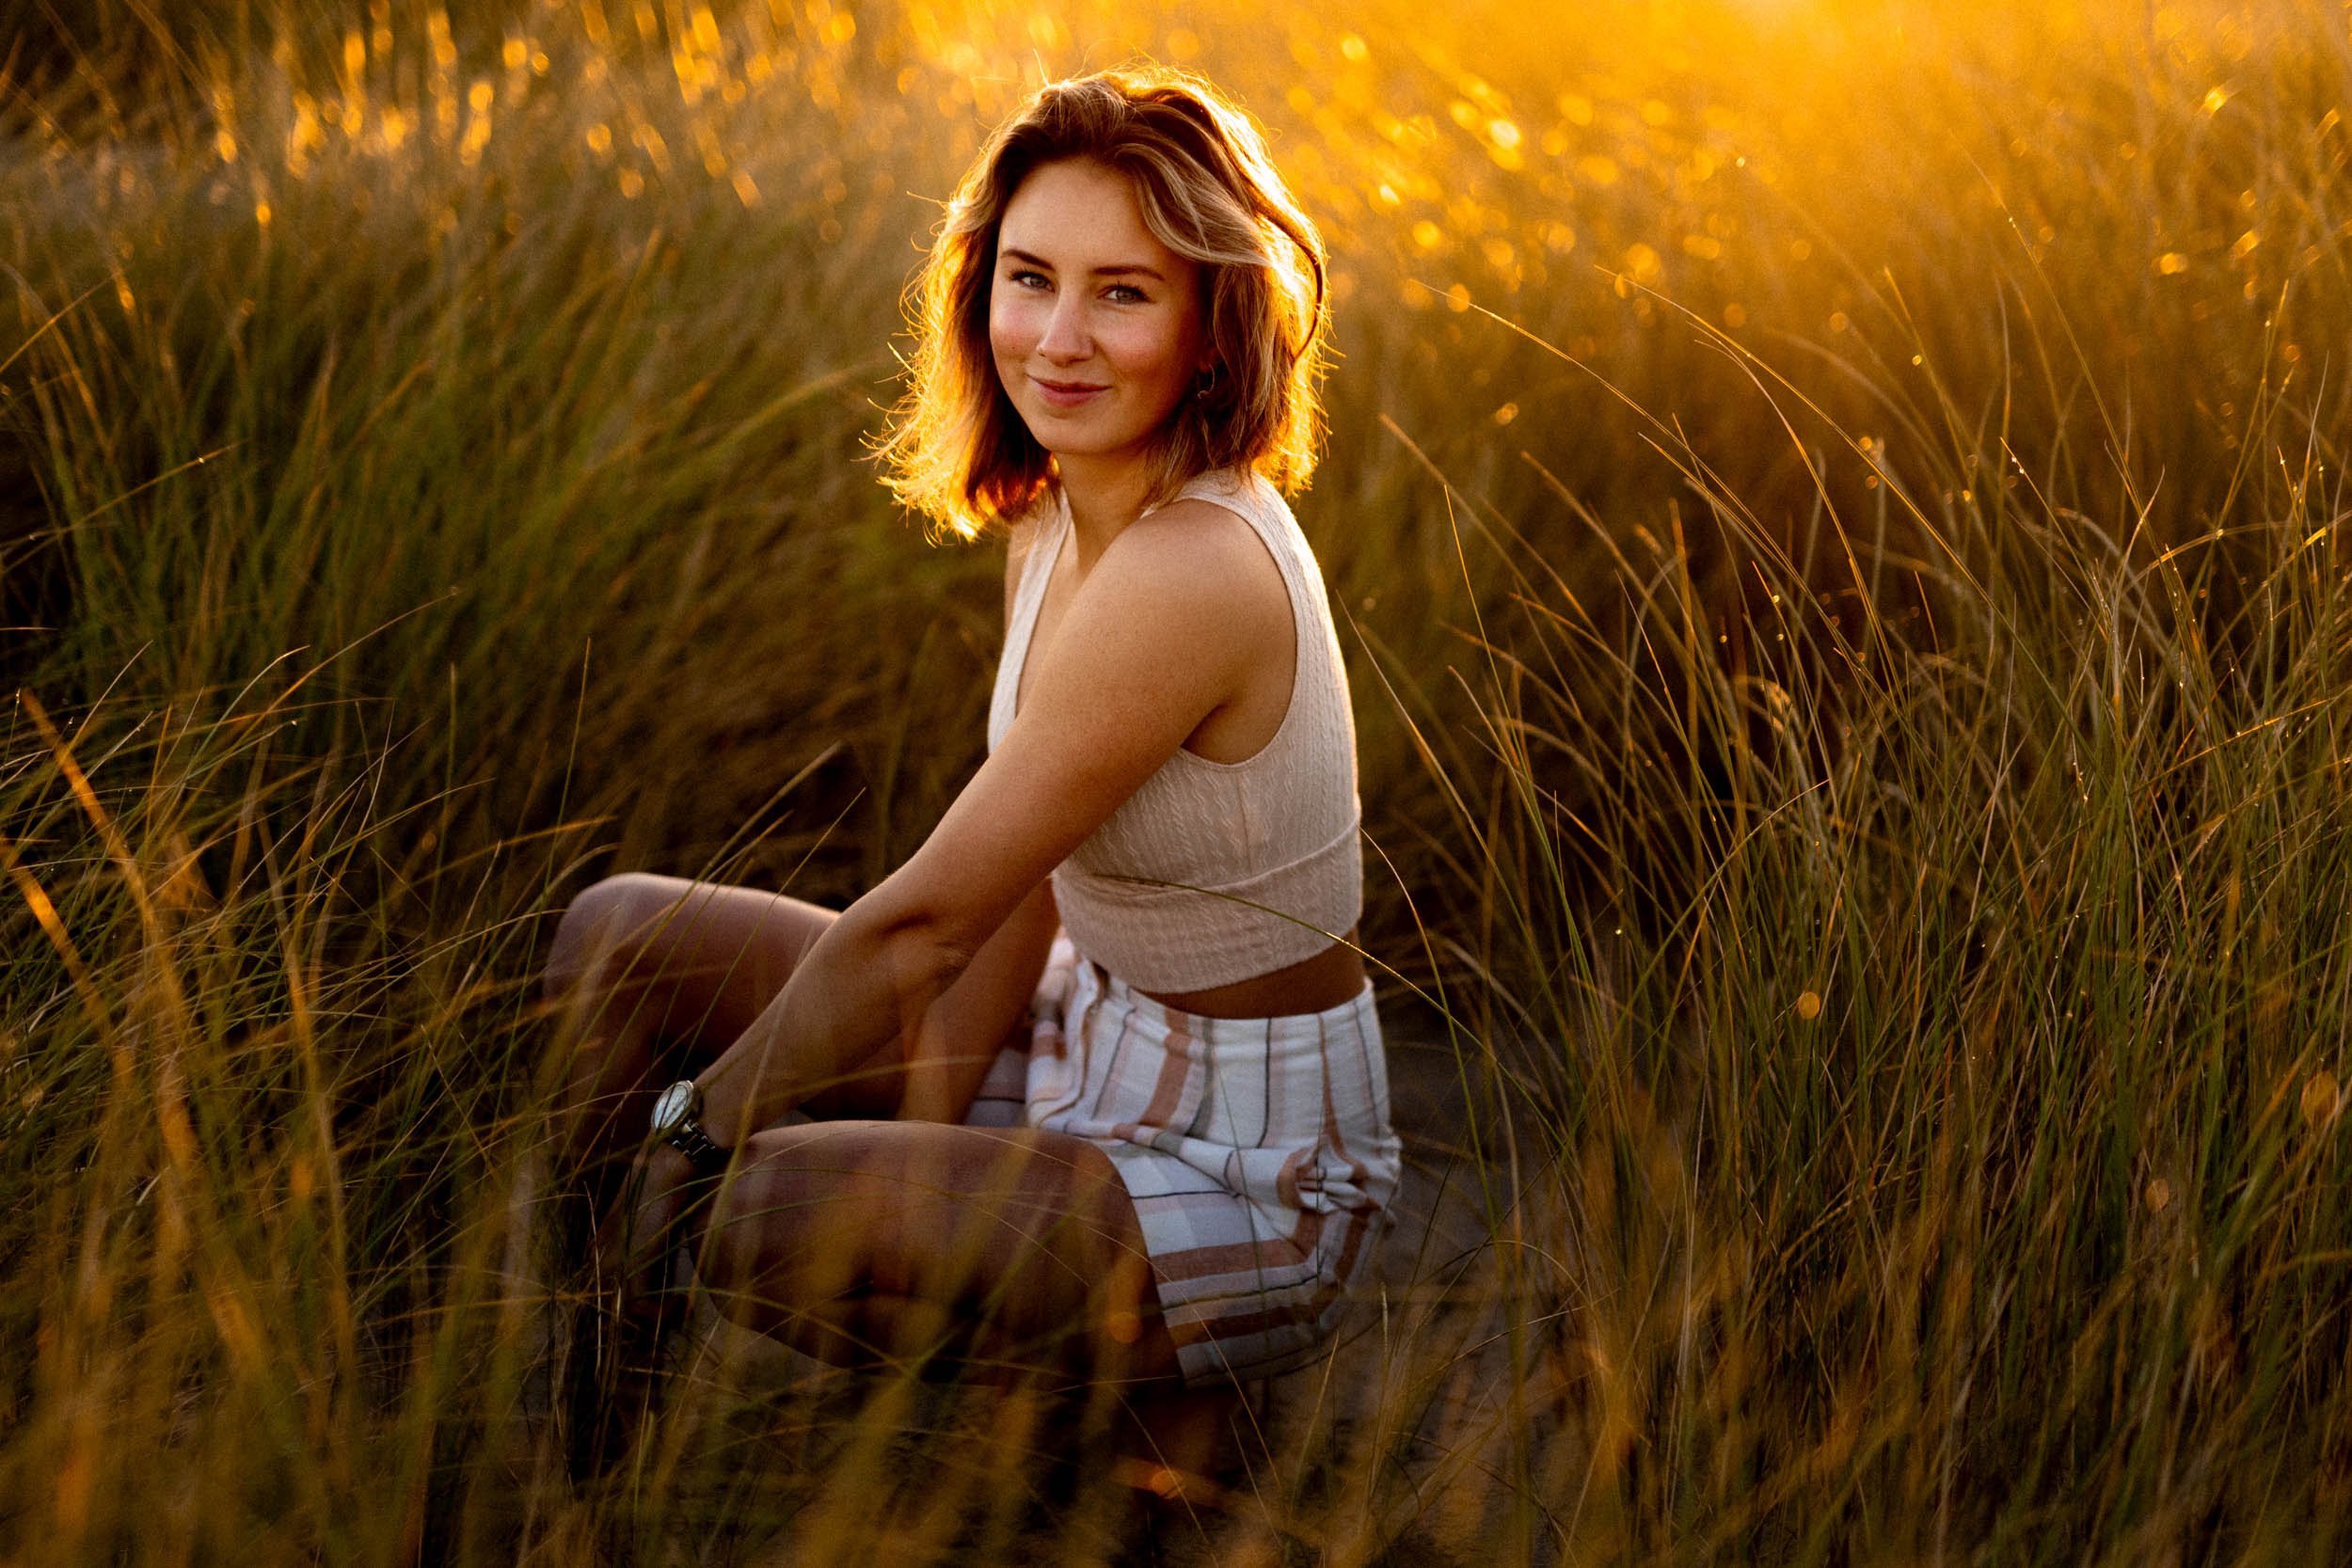 A young woman sits in tall grass at sunset, captured in a beautiful beach photo.